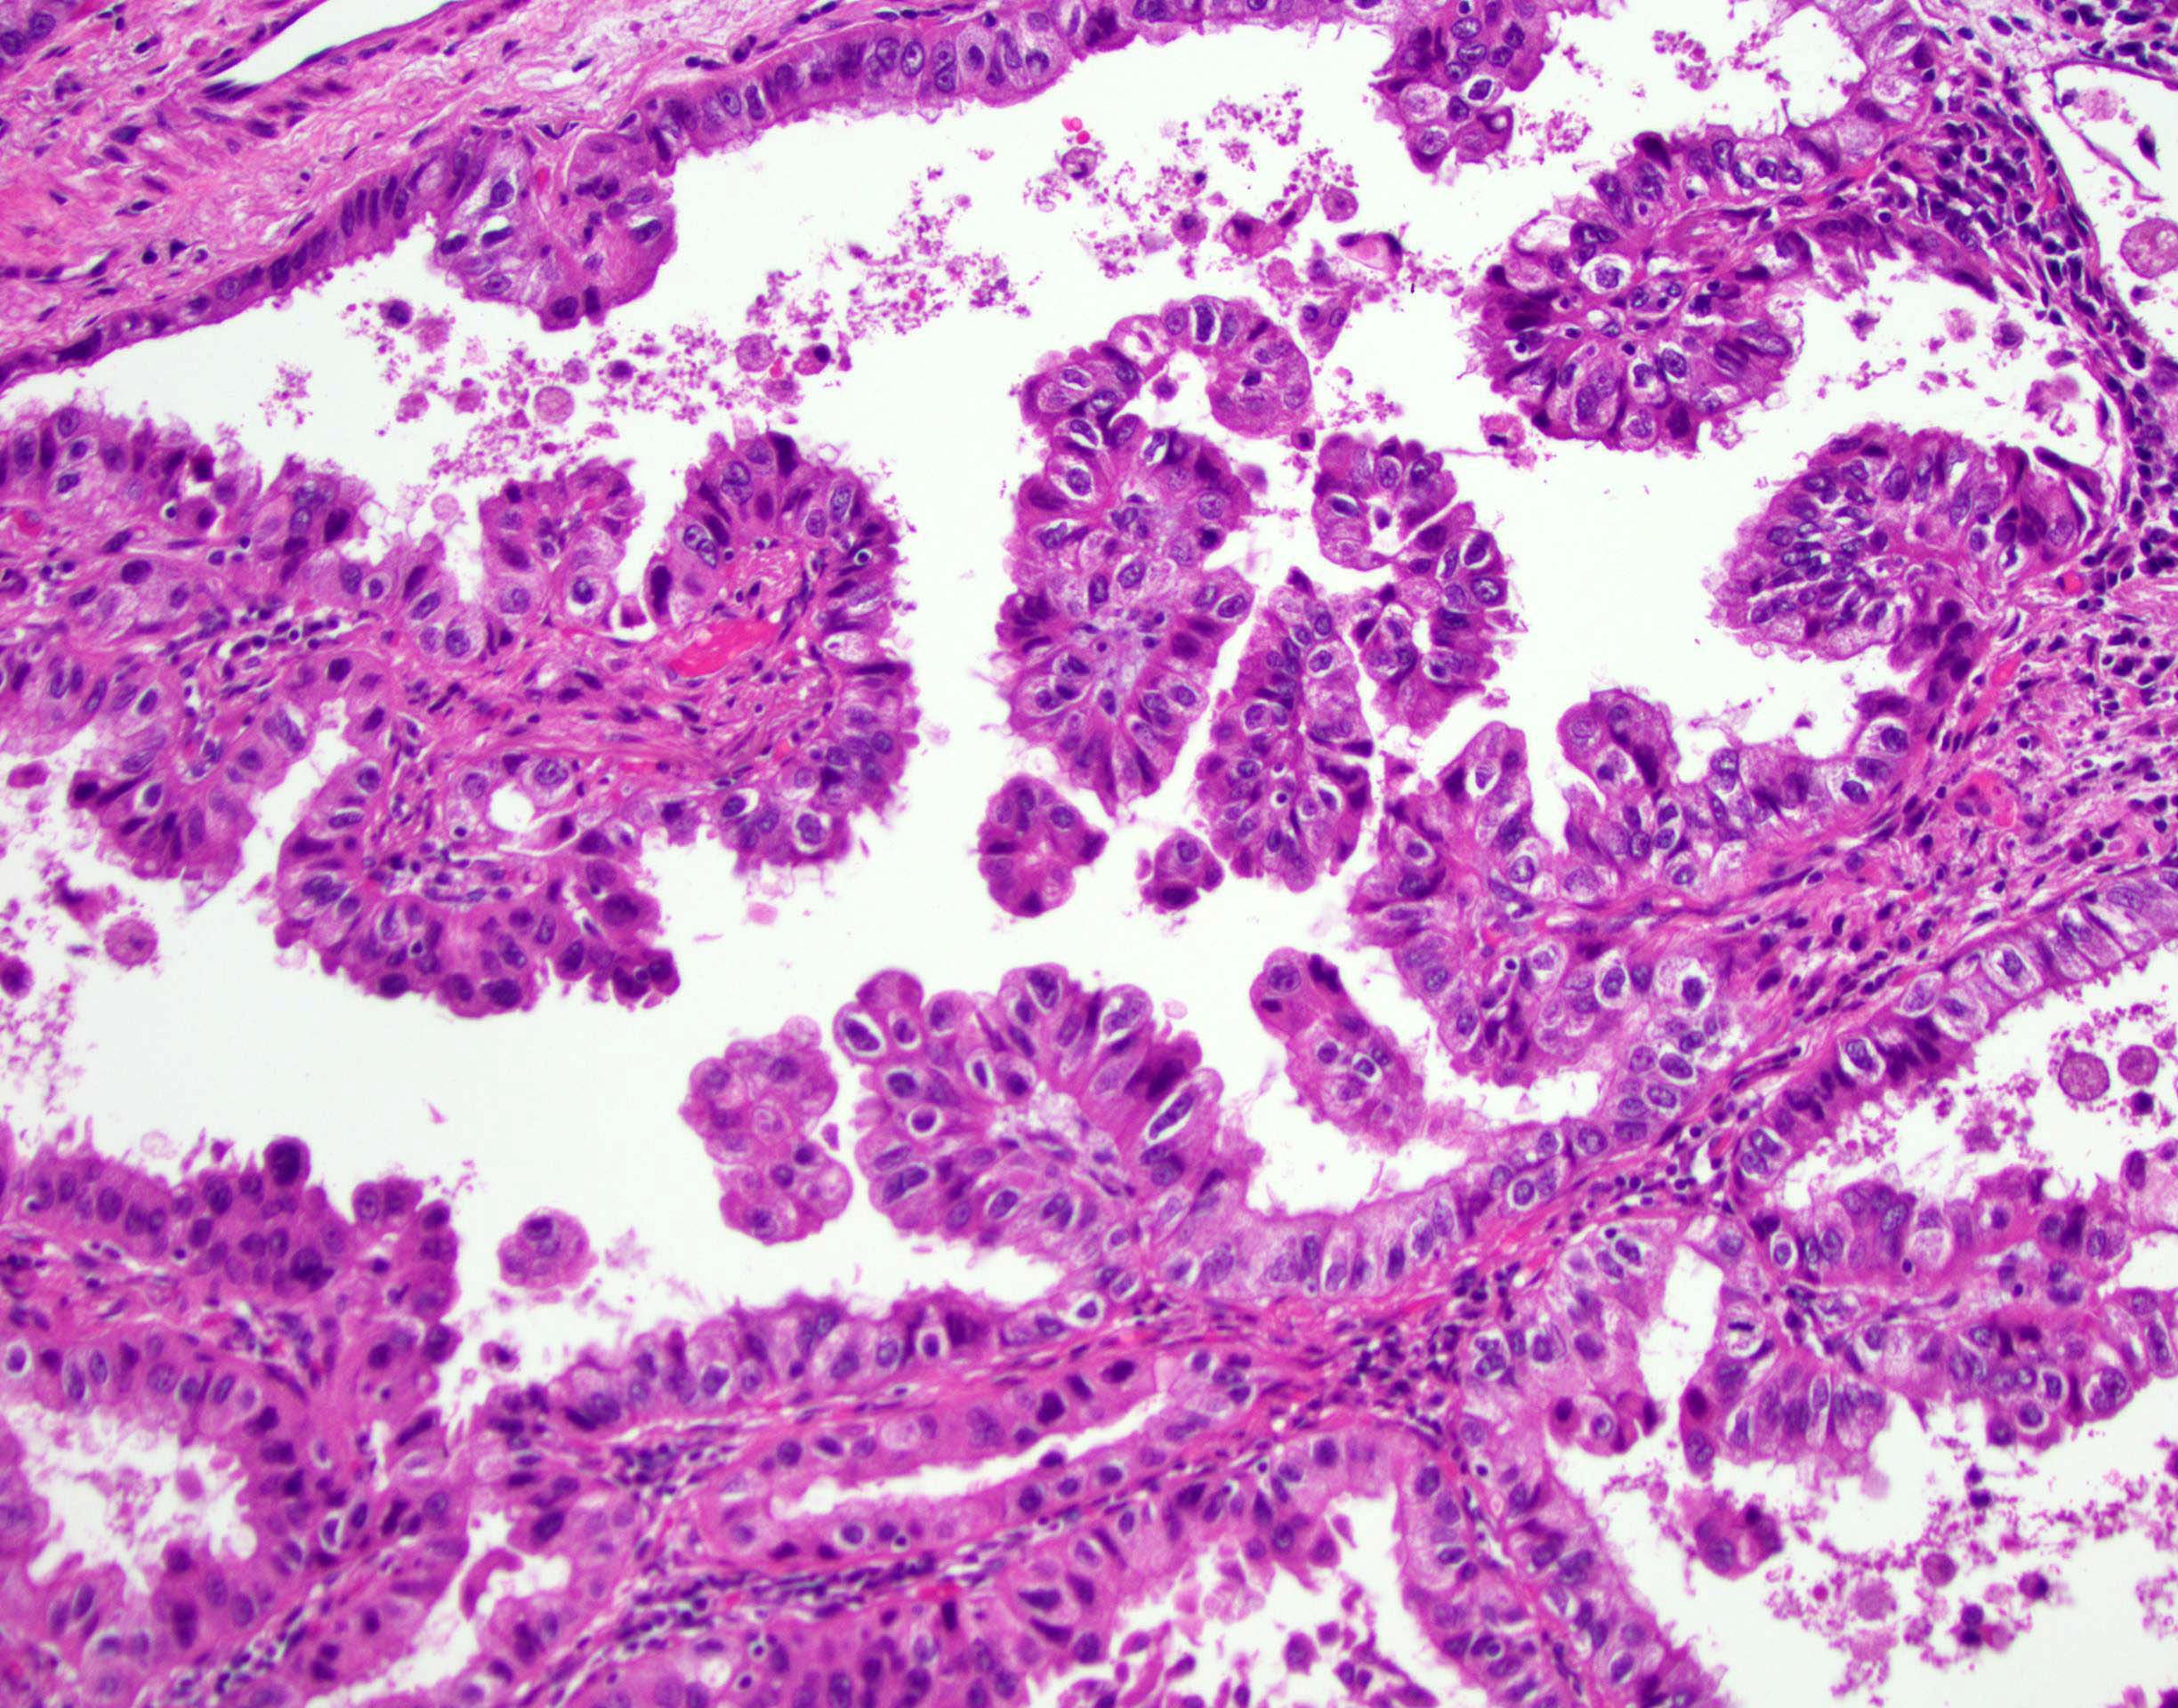 Papillary lesion lung. Papillary lesion of breast pathology outlines